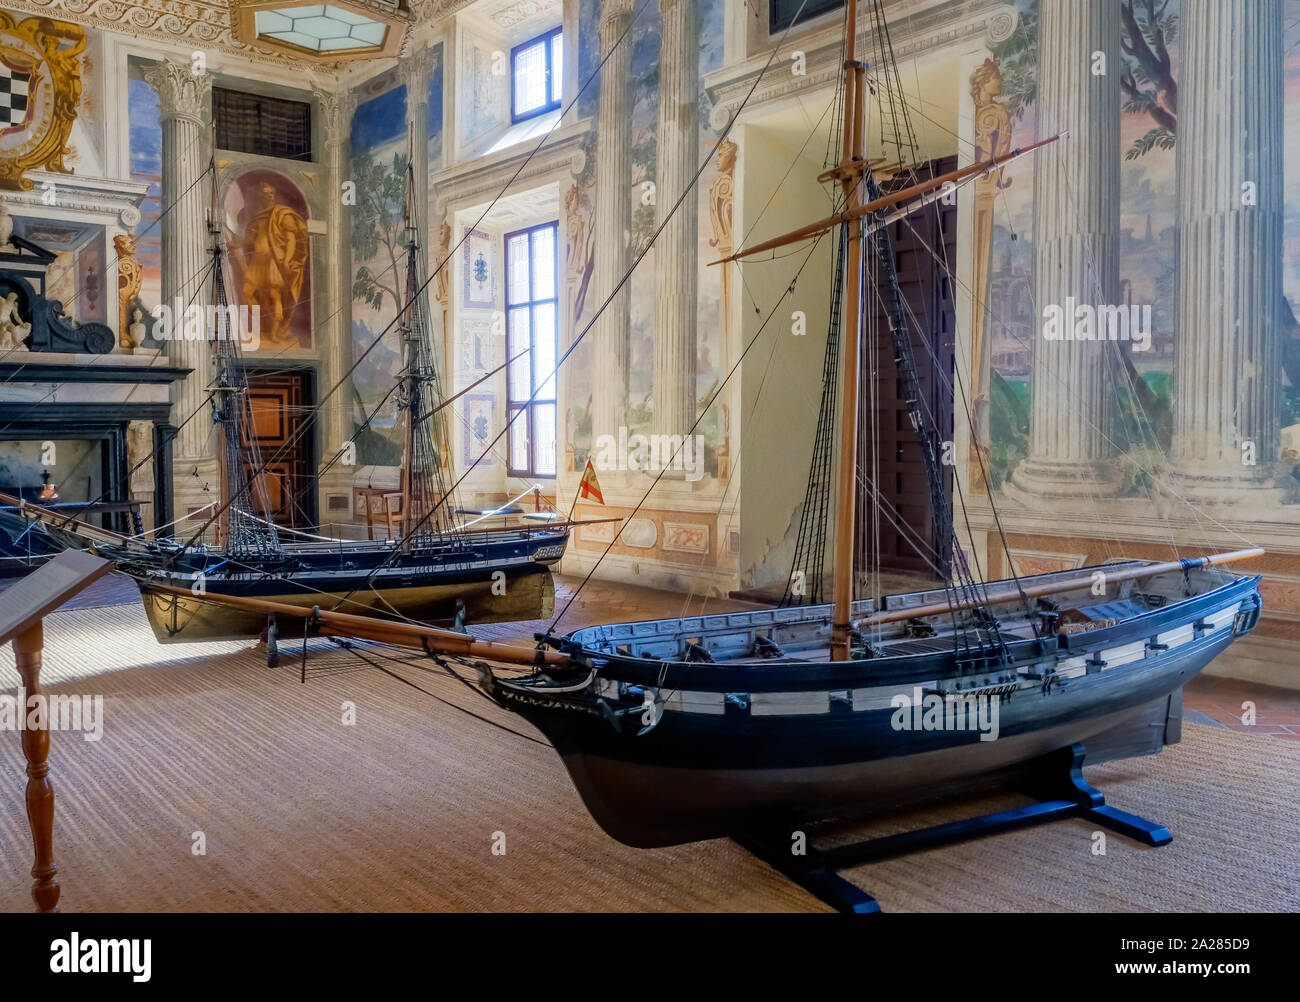 Viso del Marques, SPAIN - September 28, 2019: Models of two ships of the Spanish Navy in an archive room in the General Archive of the Navy in the pal Stock Photo